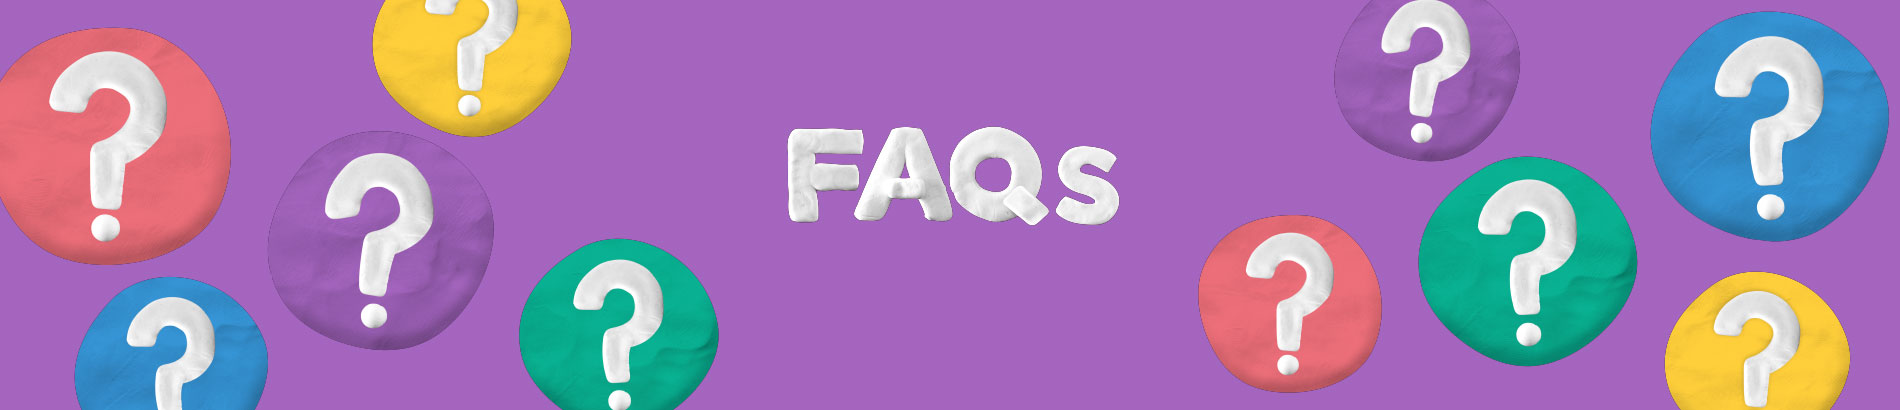 Plasticine background with question marks under page heading FAQs